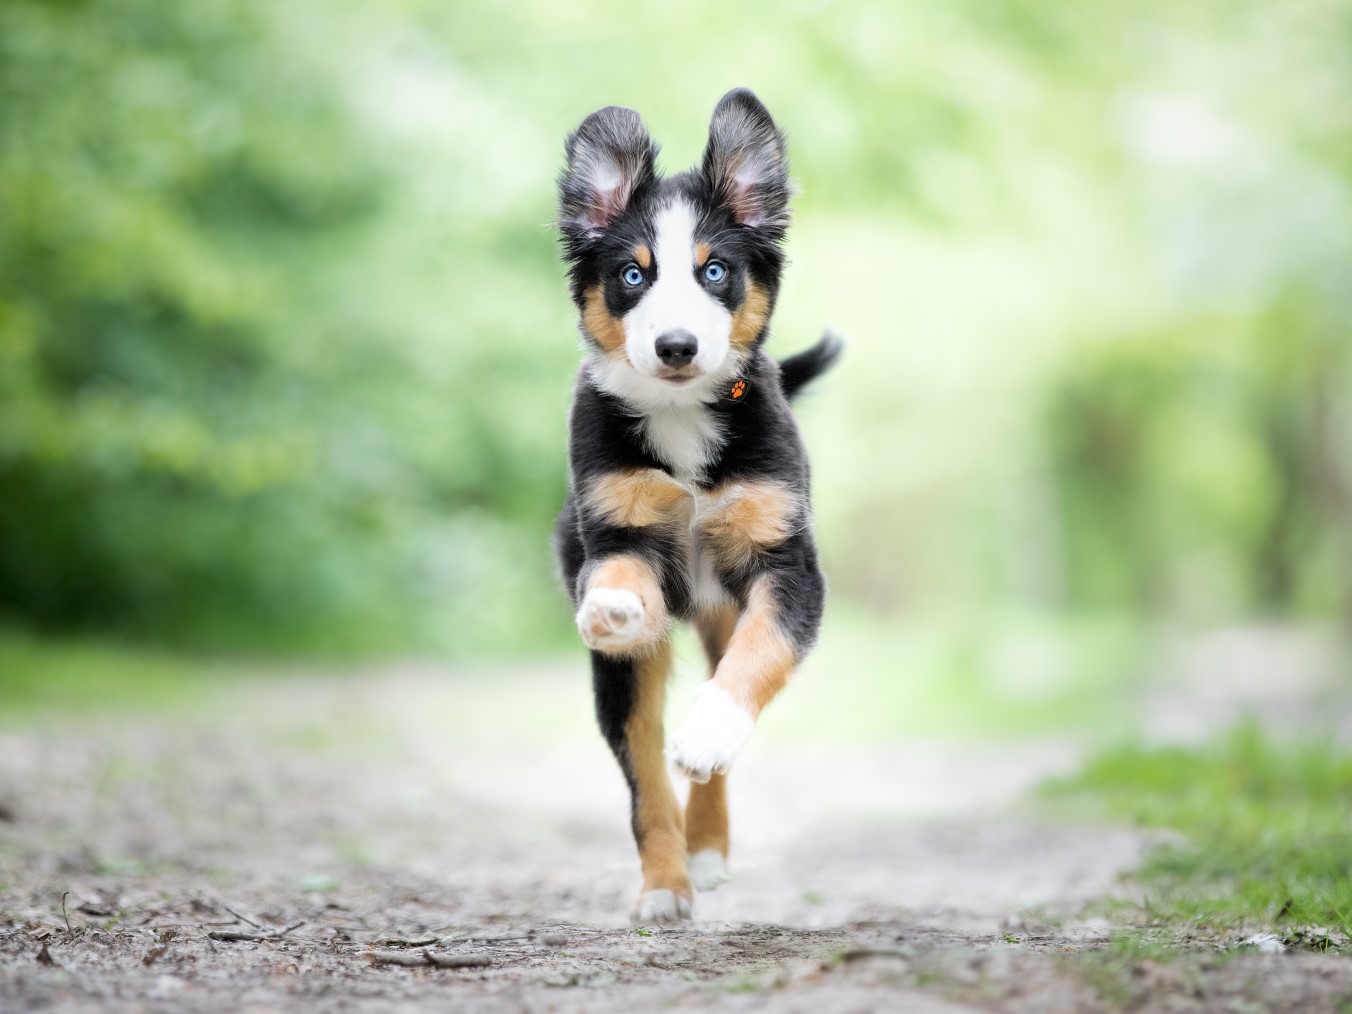 Dog_-rights_MS_outdoors_active_puppy_running_white_black_gold-dog-_@ilaanddrax-1.jpg